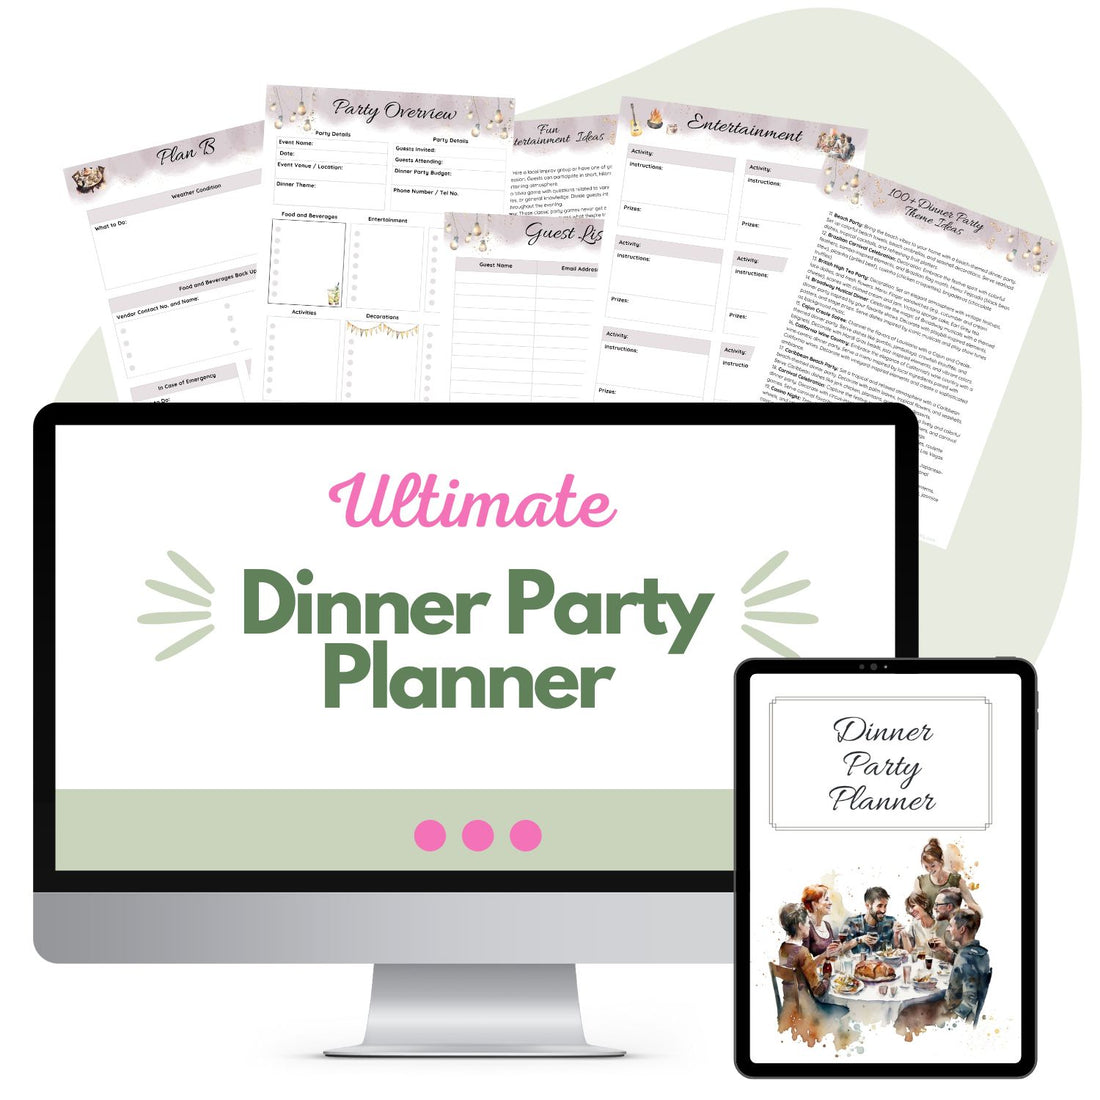 Ultimate Dinner Party Planner